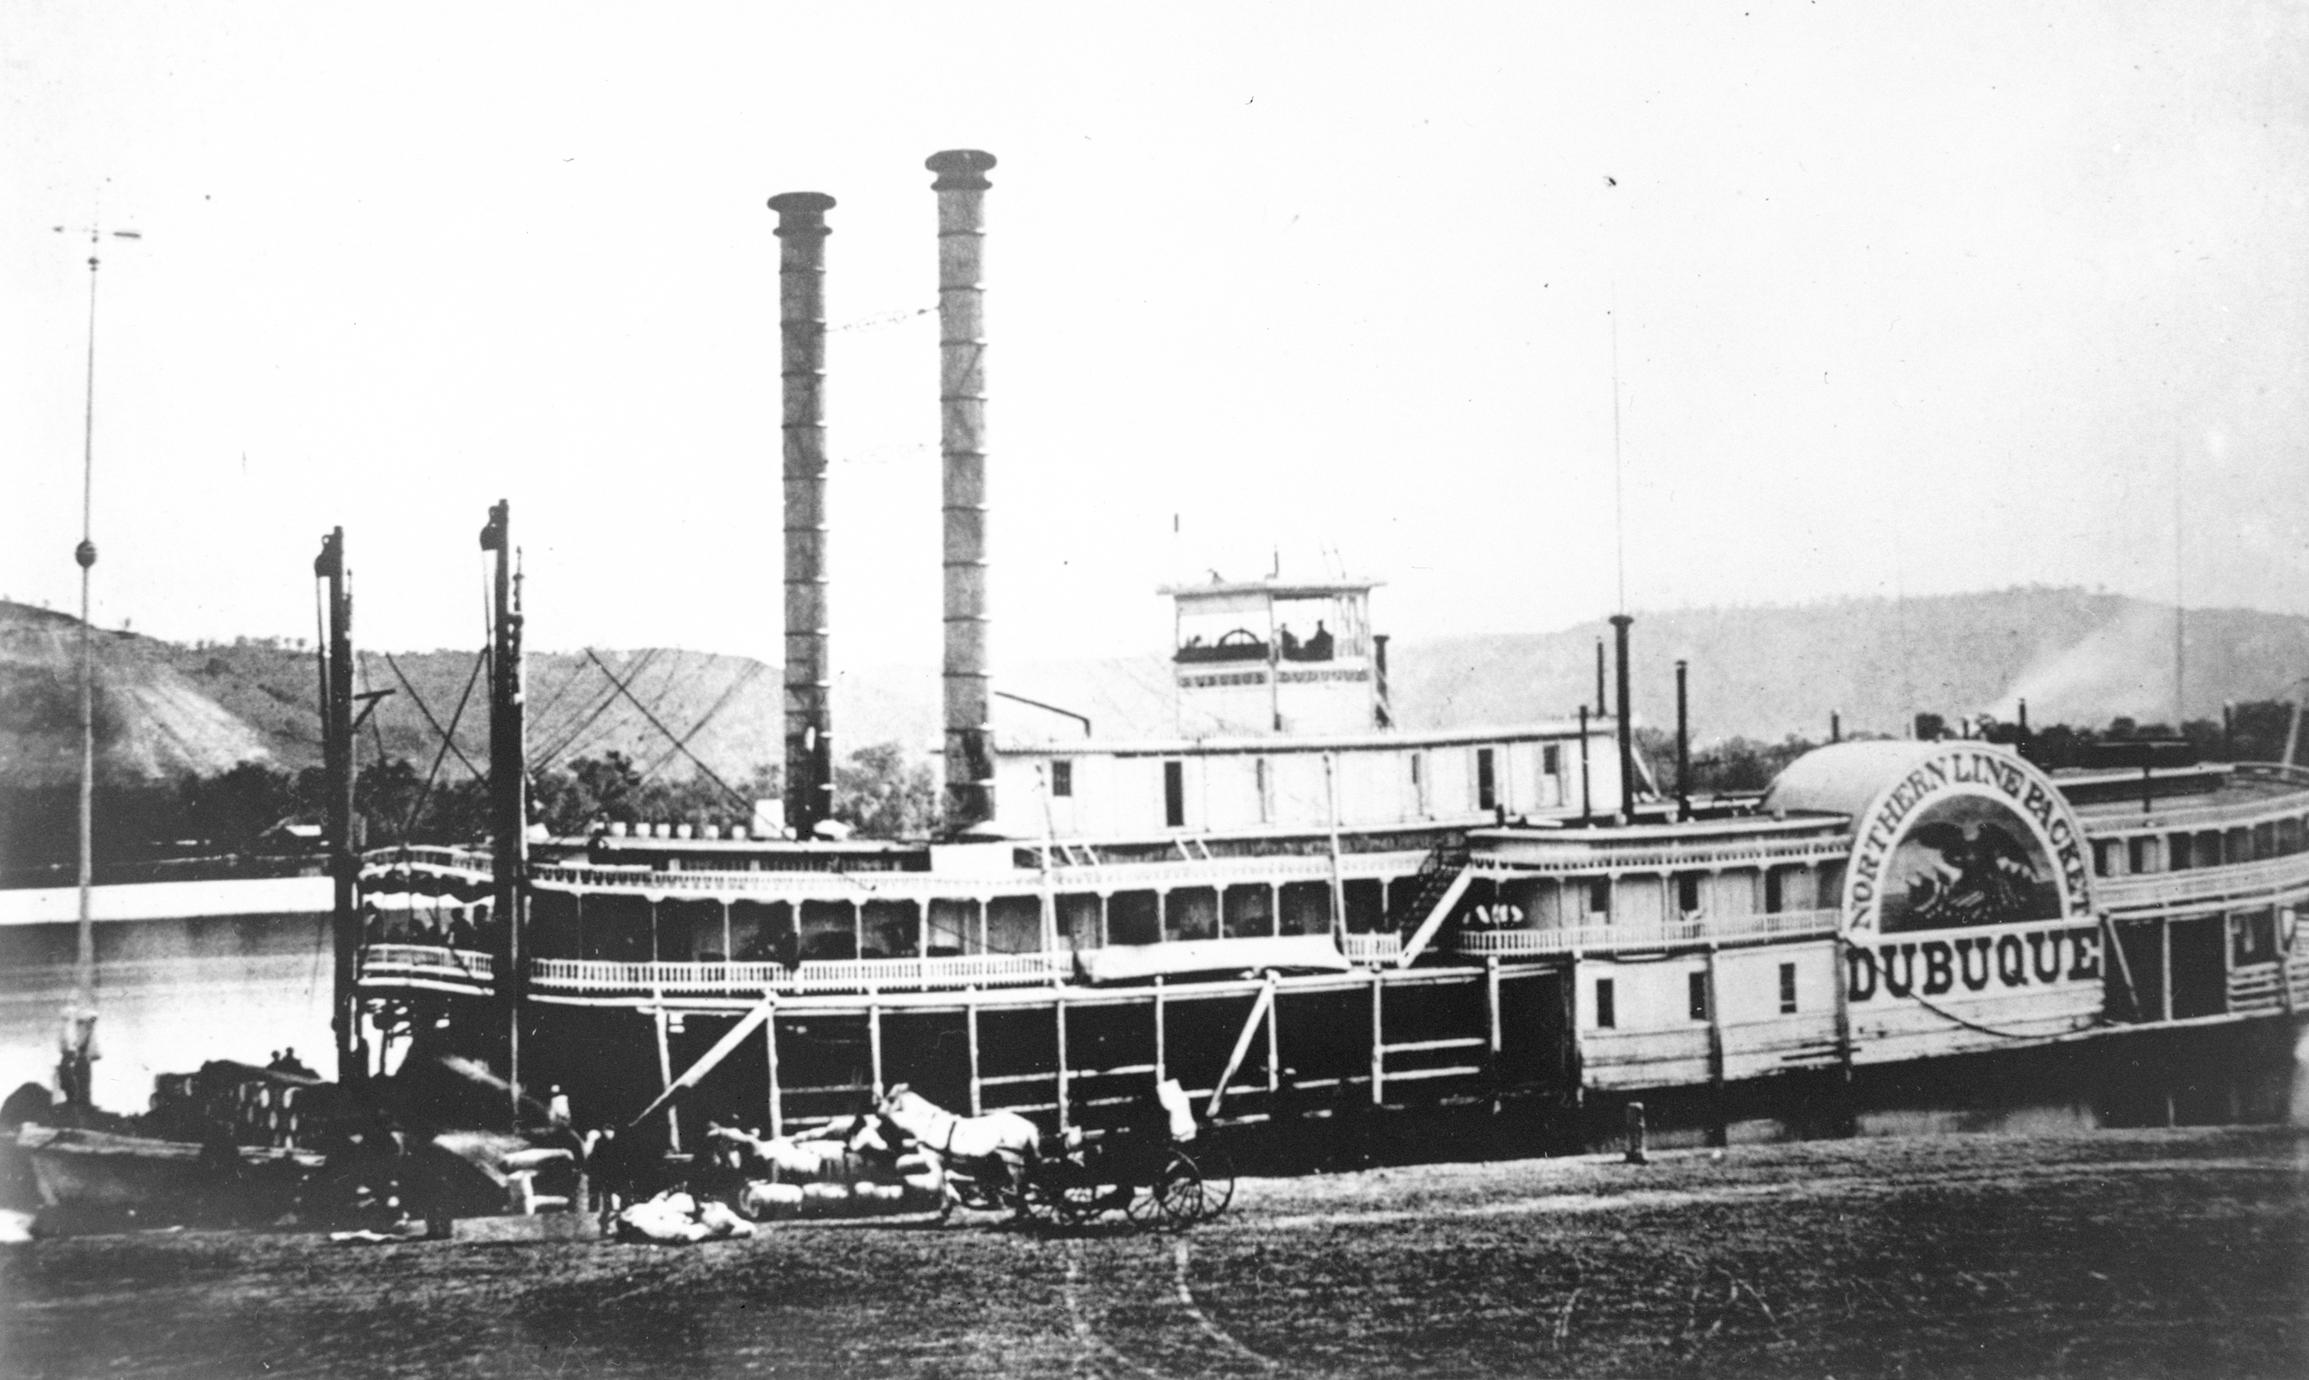 Dubuque (Packet, 1867-1879)